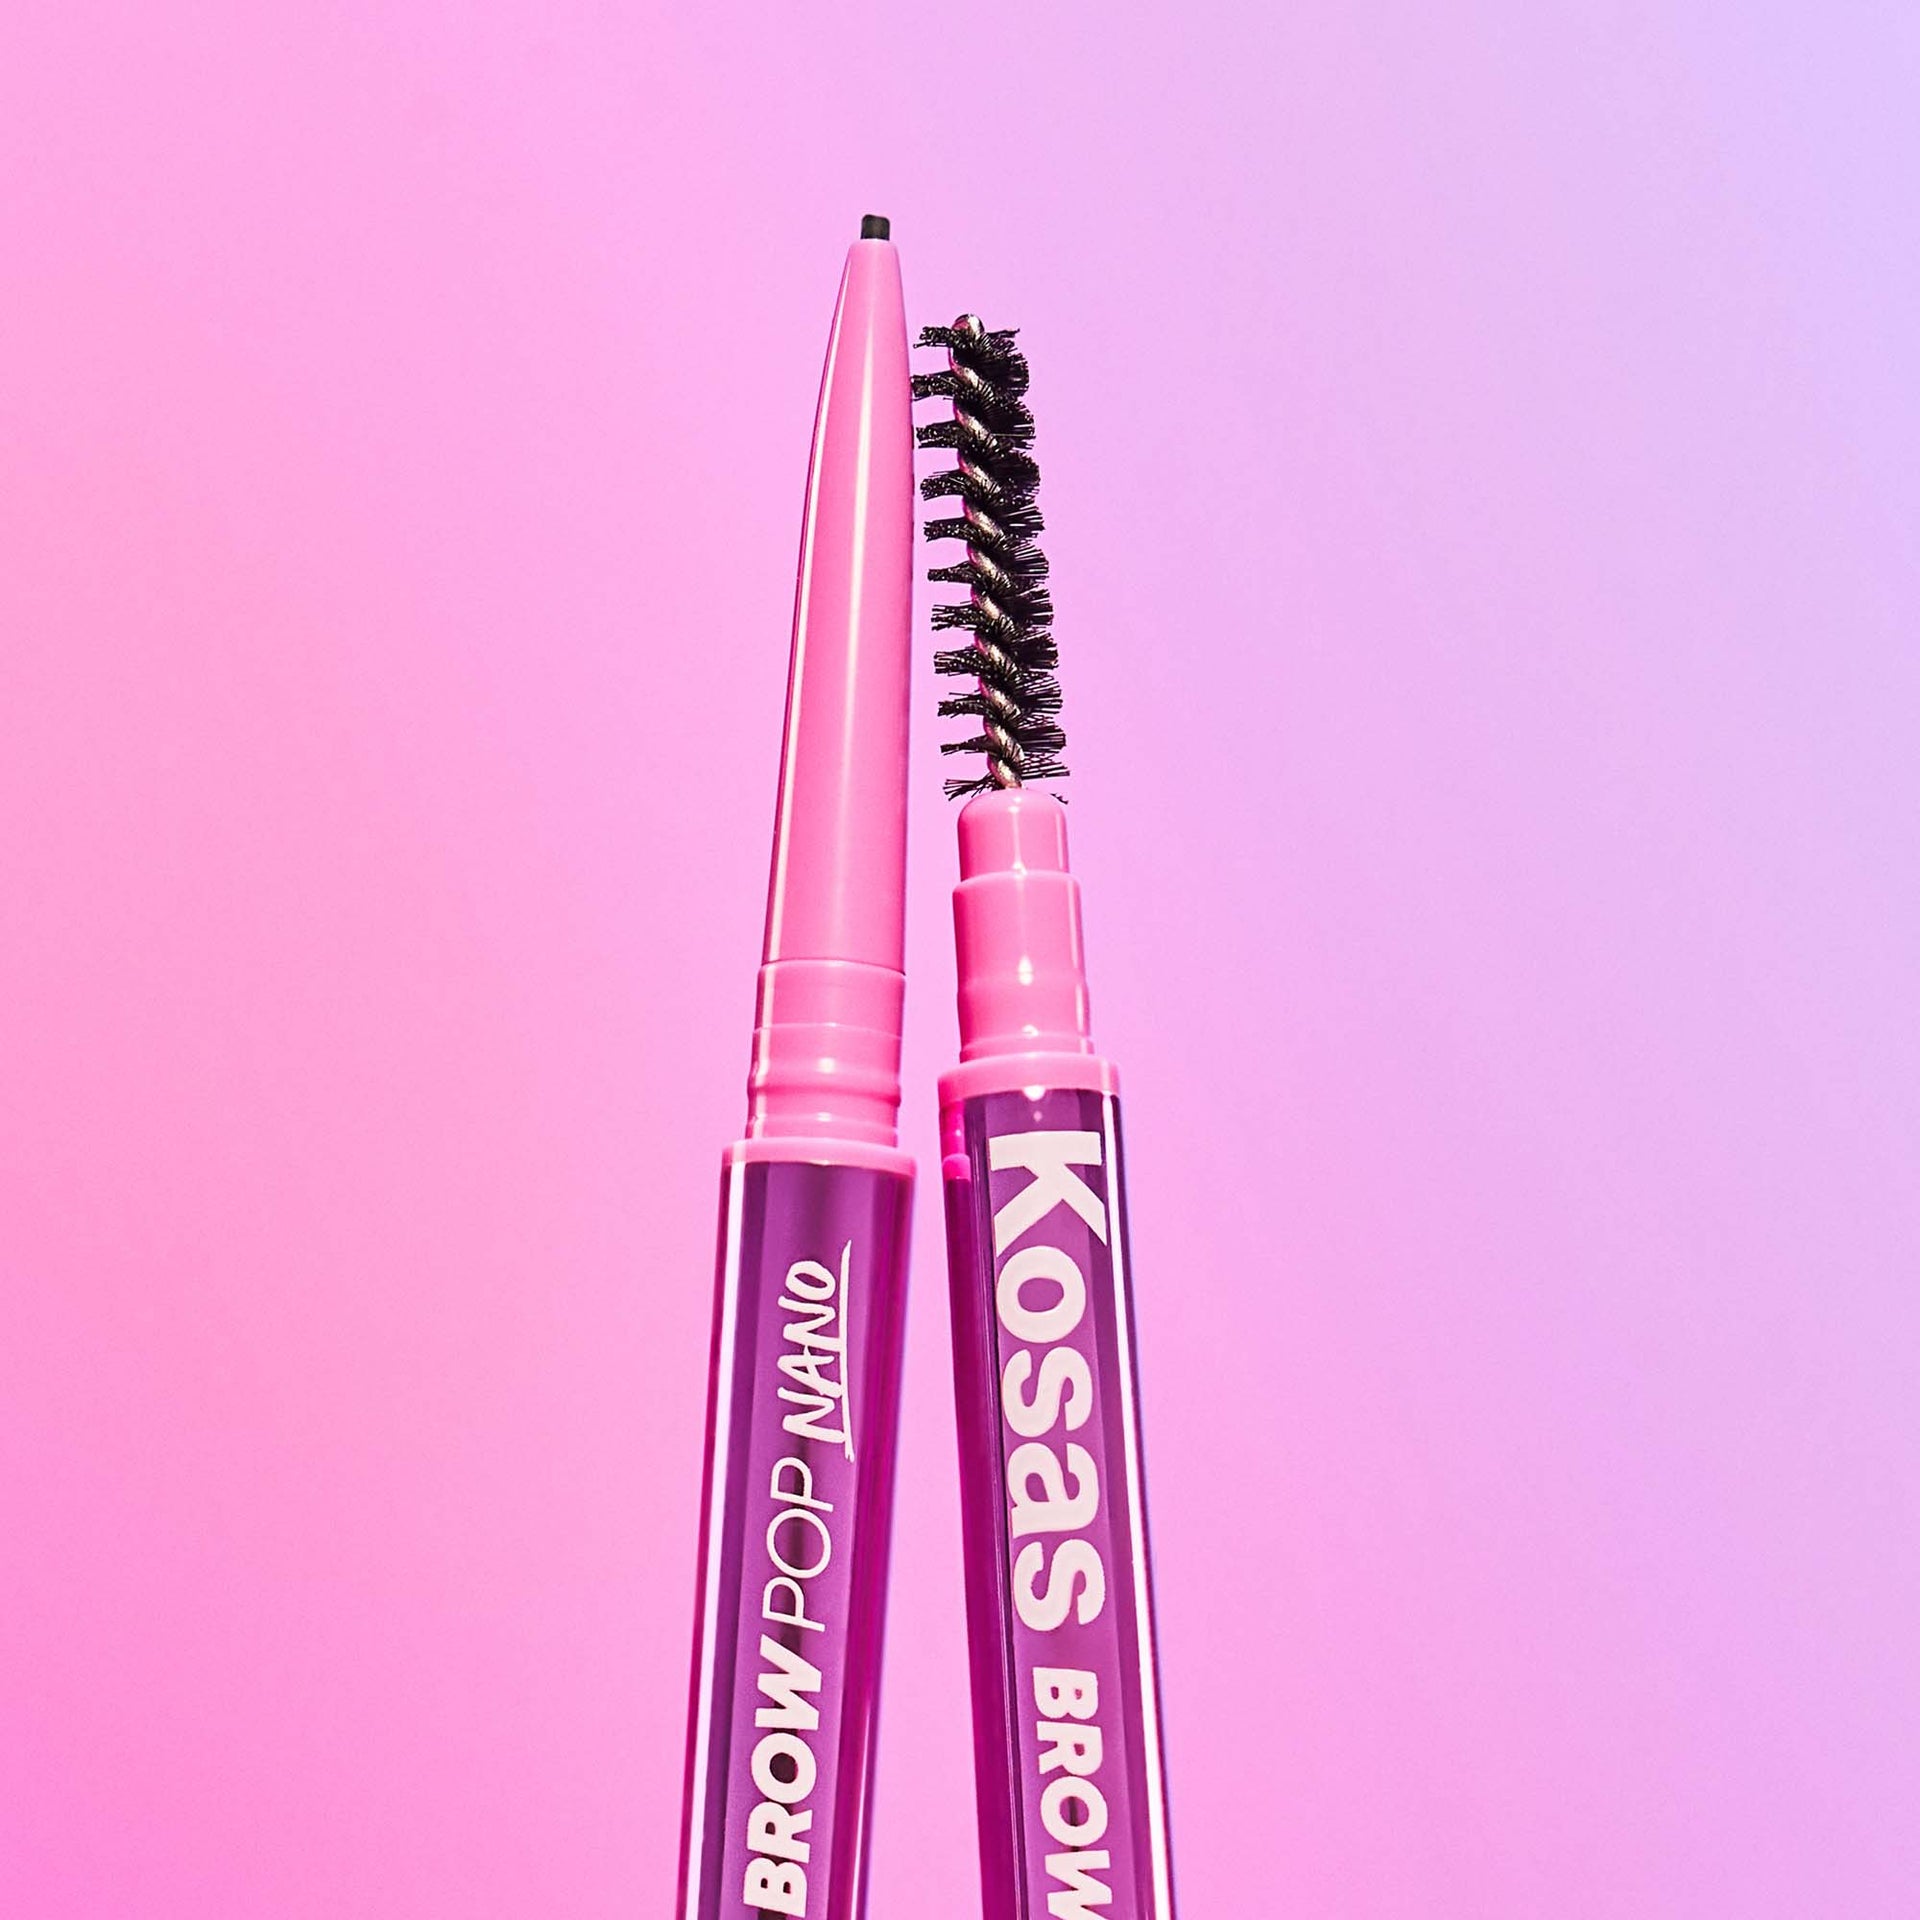 A close-up image featuring both ends of Kosas Brow Pop Nano, displaying the spoolie end and the precise tip for application.